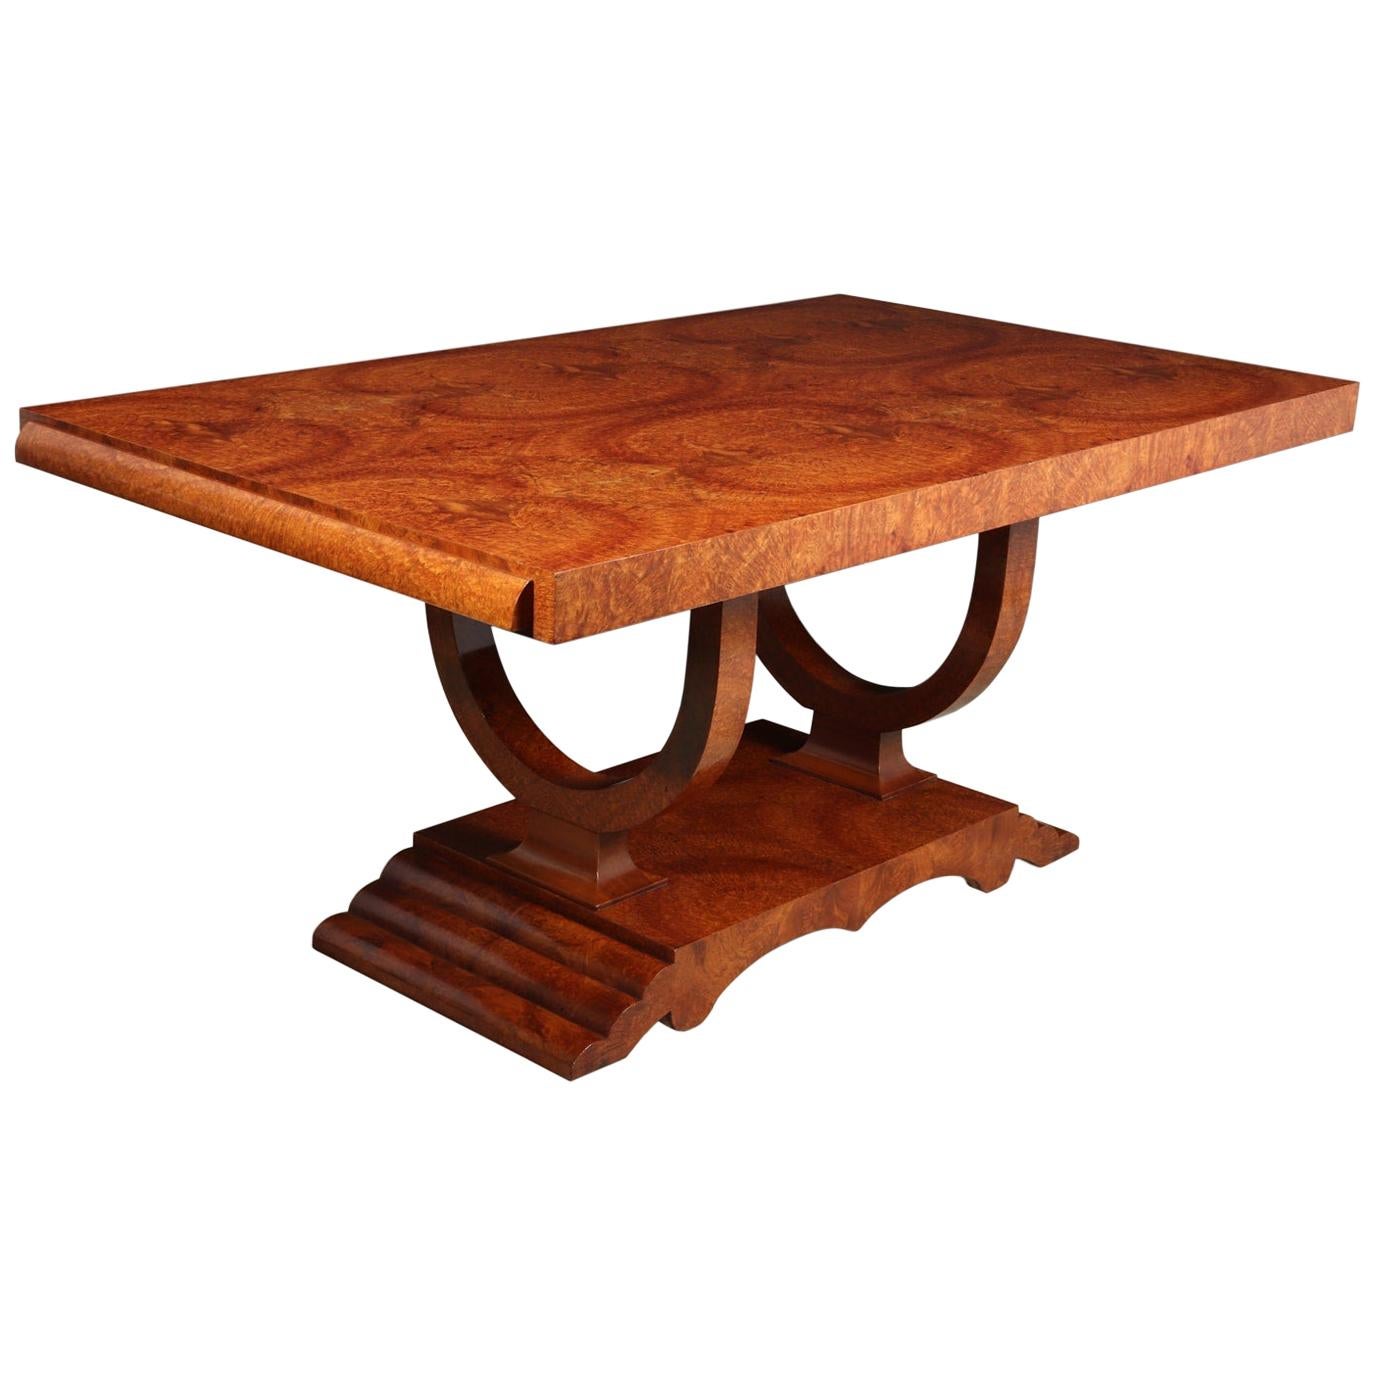 French Art Deco Amboyna Extending Dining Table, circa 1930 For Sale